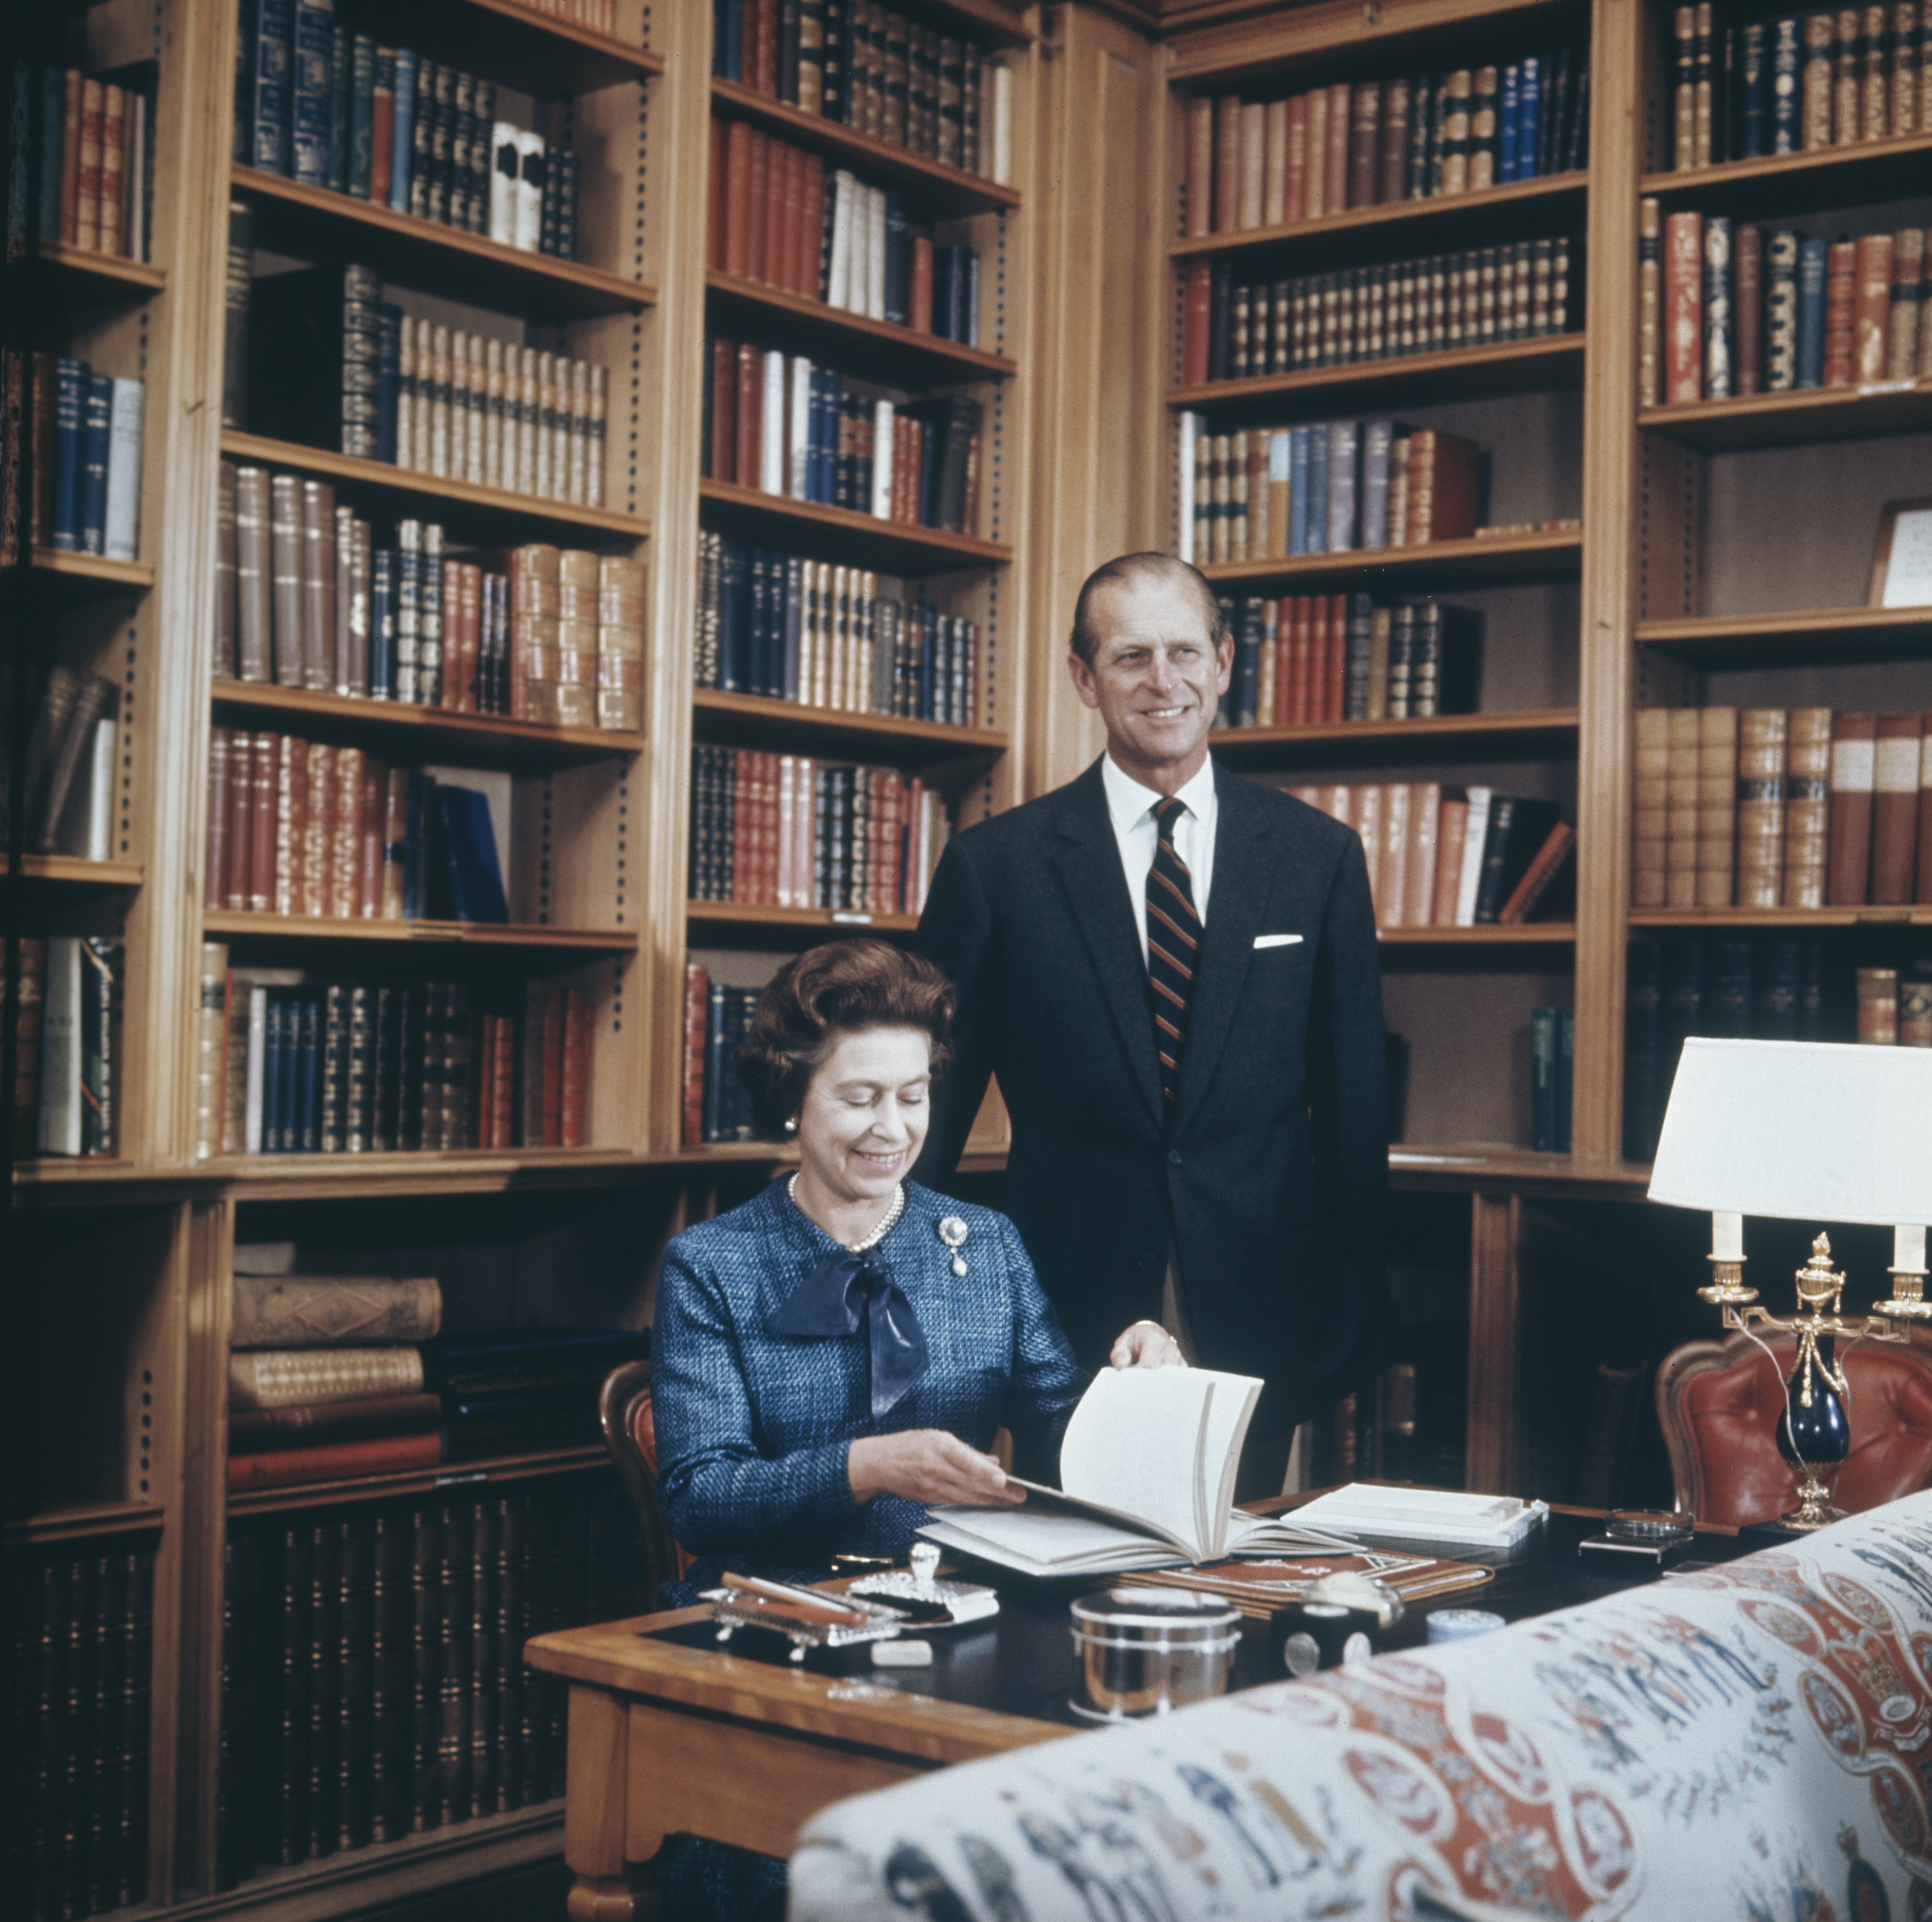 Queen Elizabeth II and Prince Philip in the study at Balmoral Castle, Scotland, on September 26, 1976 | Source: Getty Images